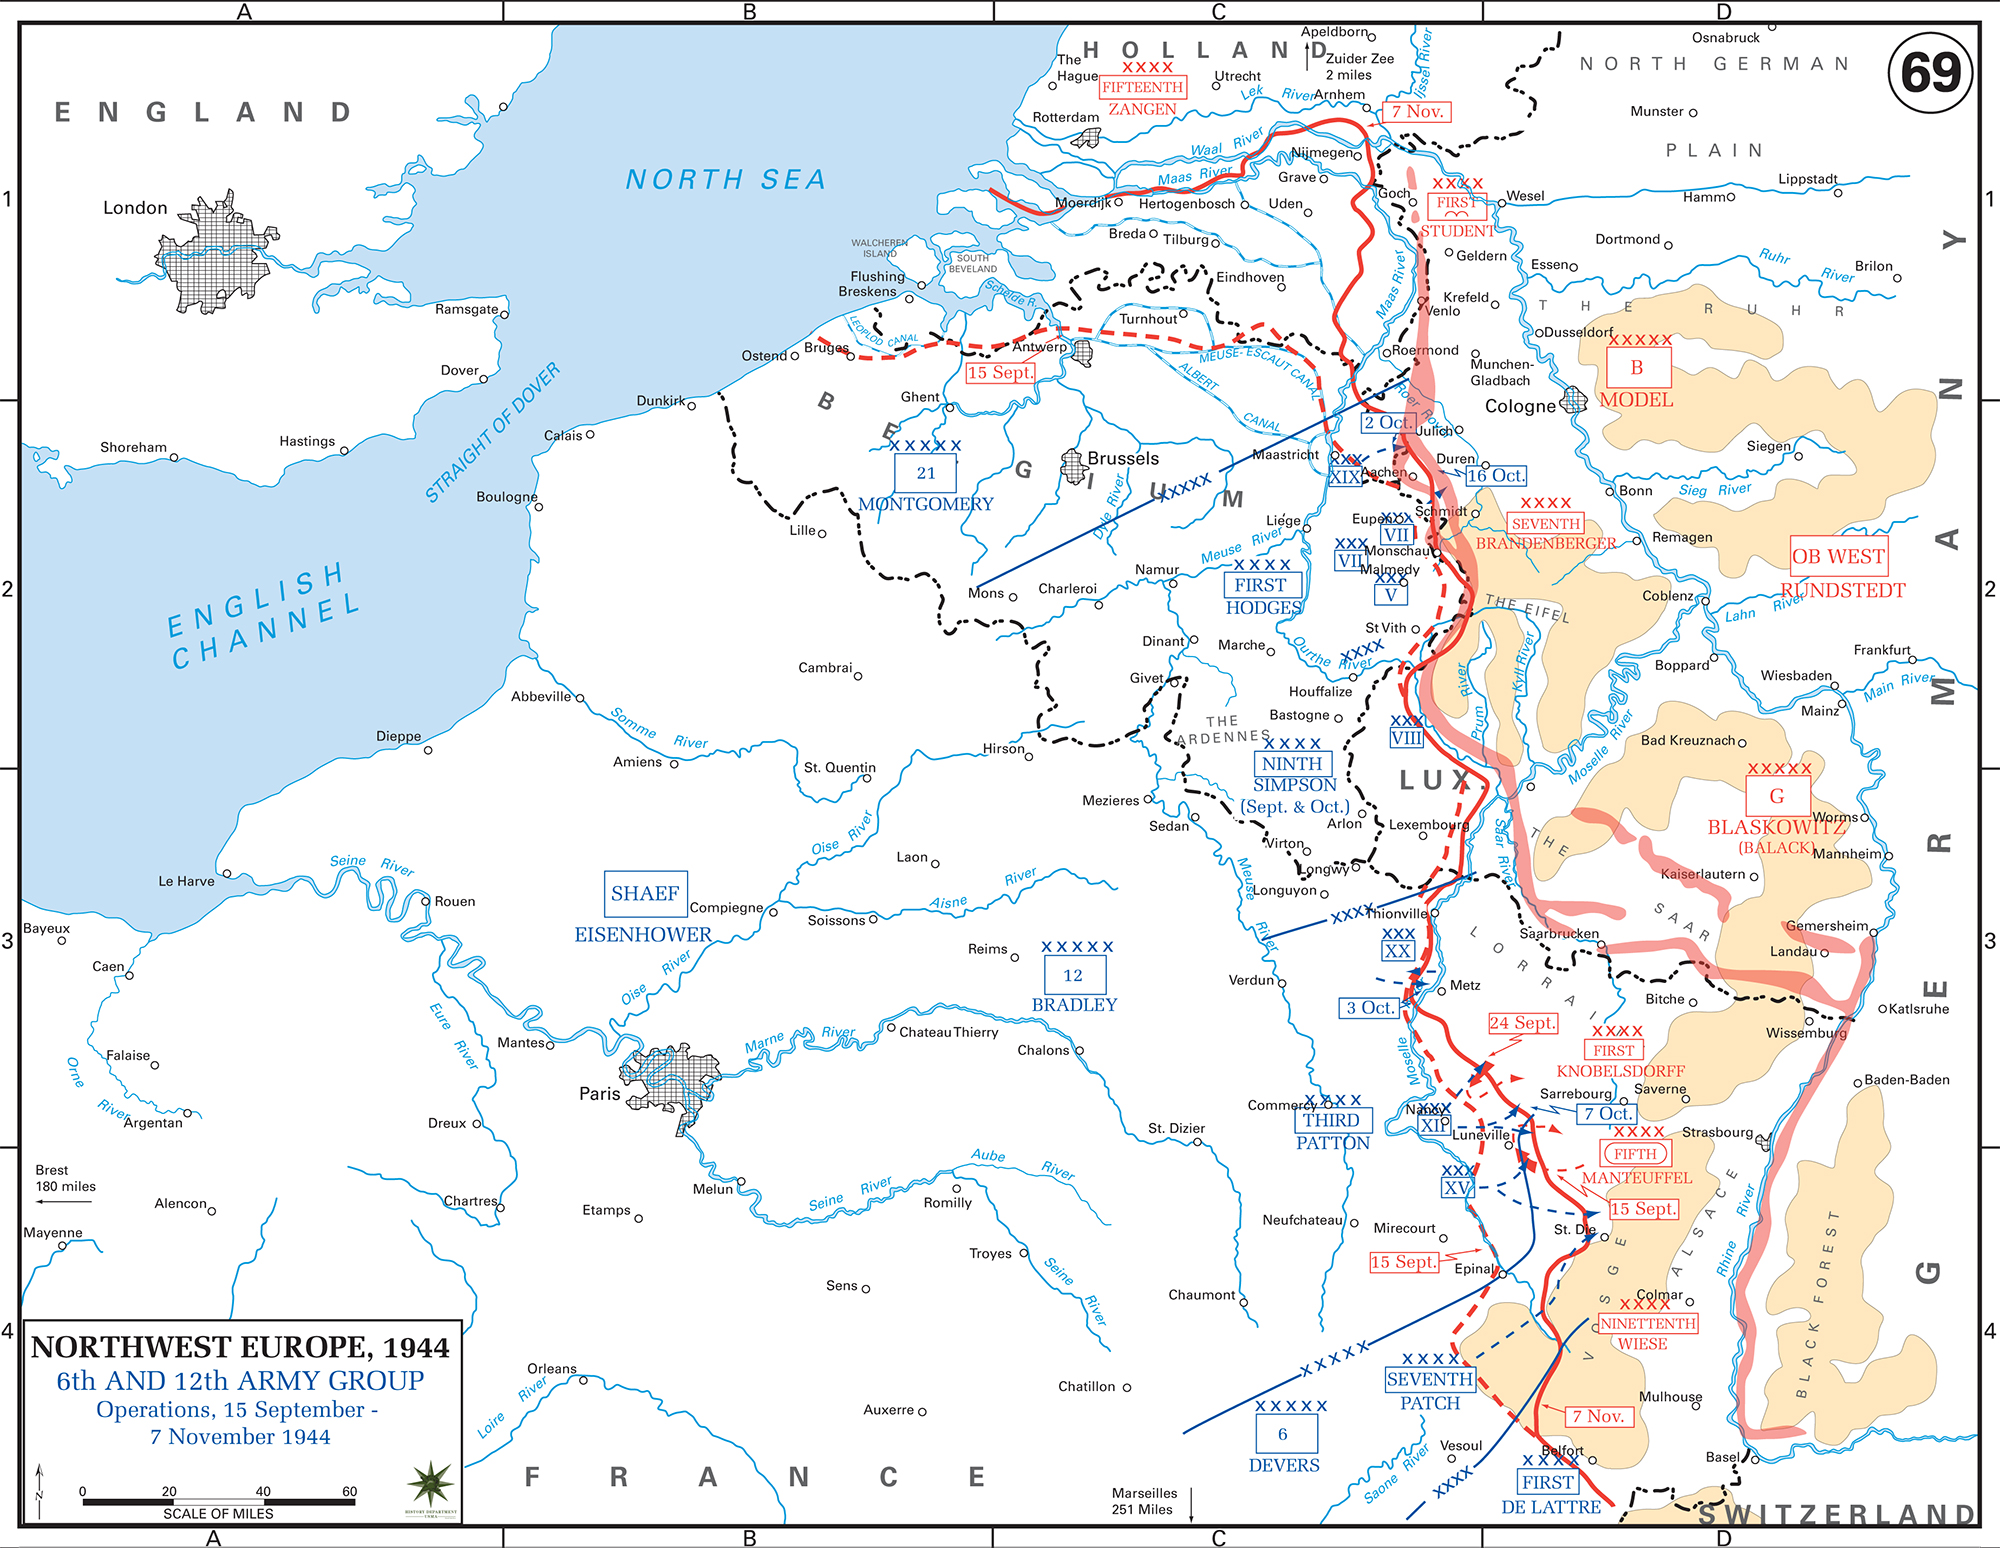 Map of World War II: Western Europe, 6th and 12th Army Group, Operations September 15 - November 7, 1944